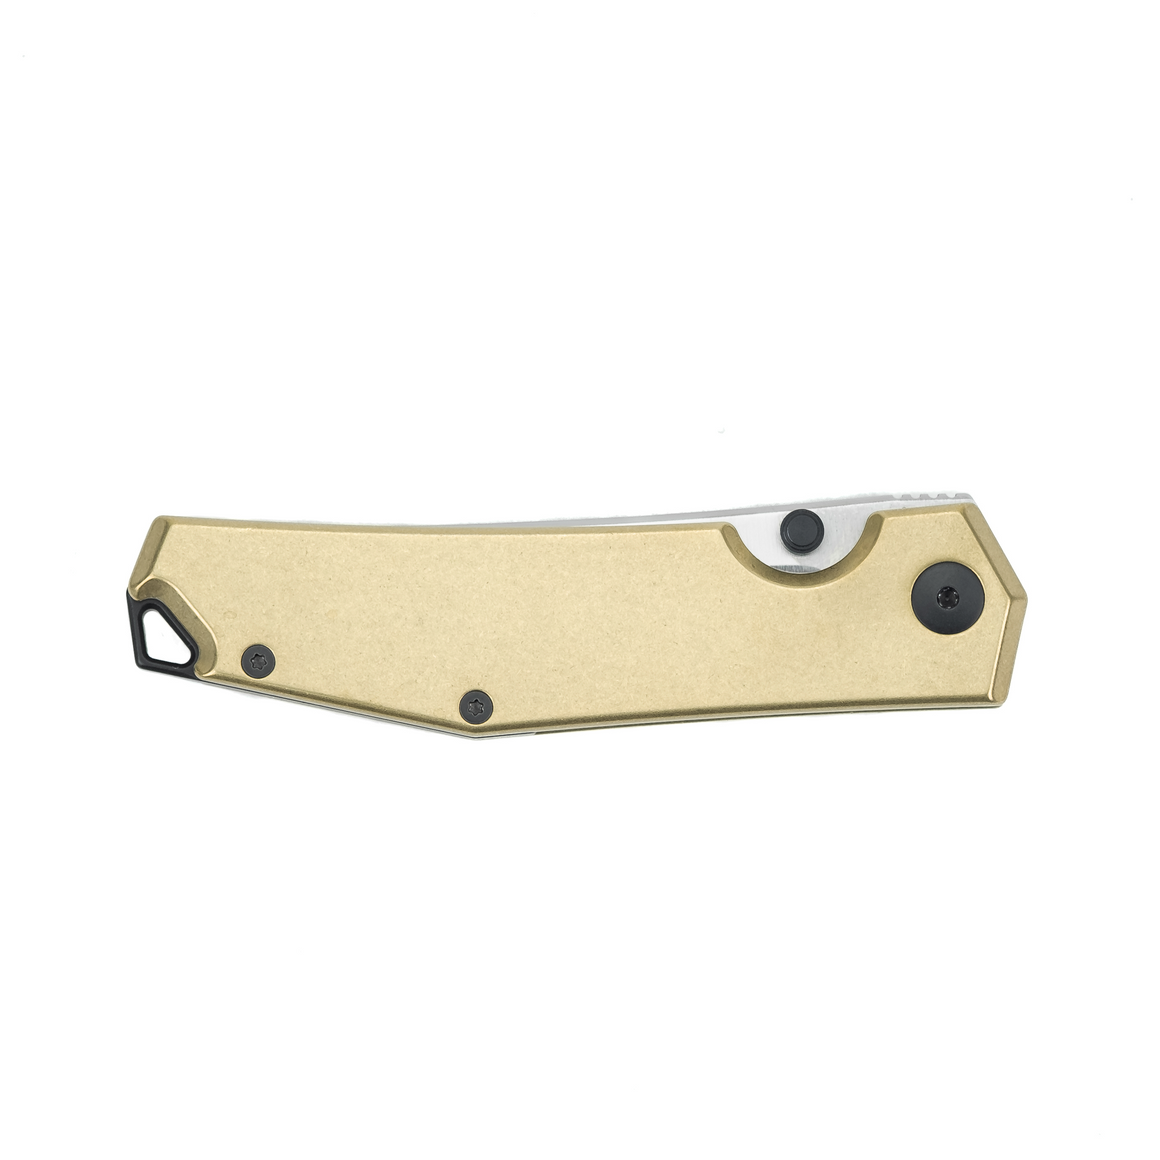 ACE Clyde - Brass EDC knife M390 Blade Steel -  Satin finish - Brass Handle - closed